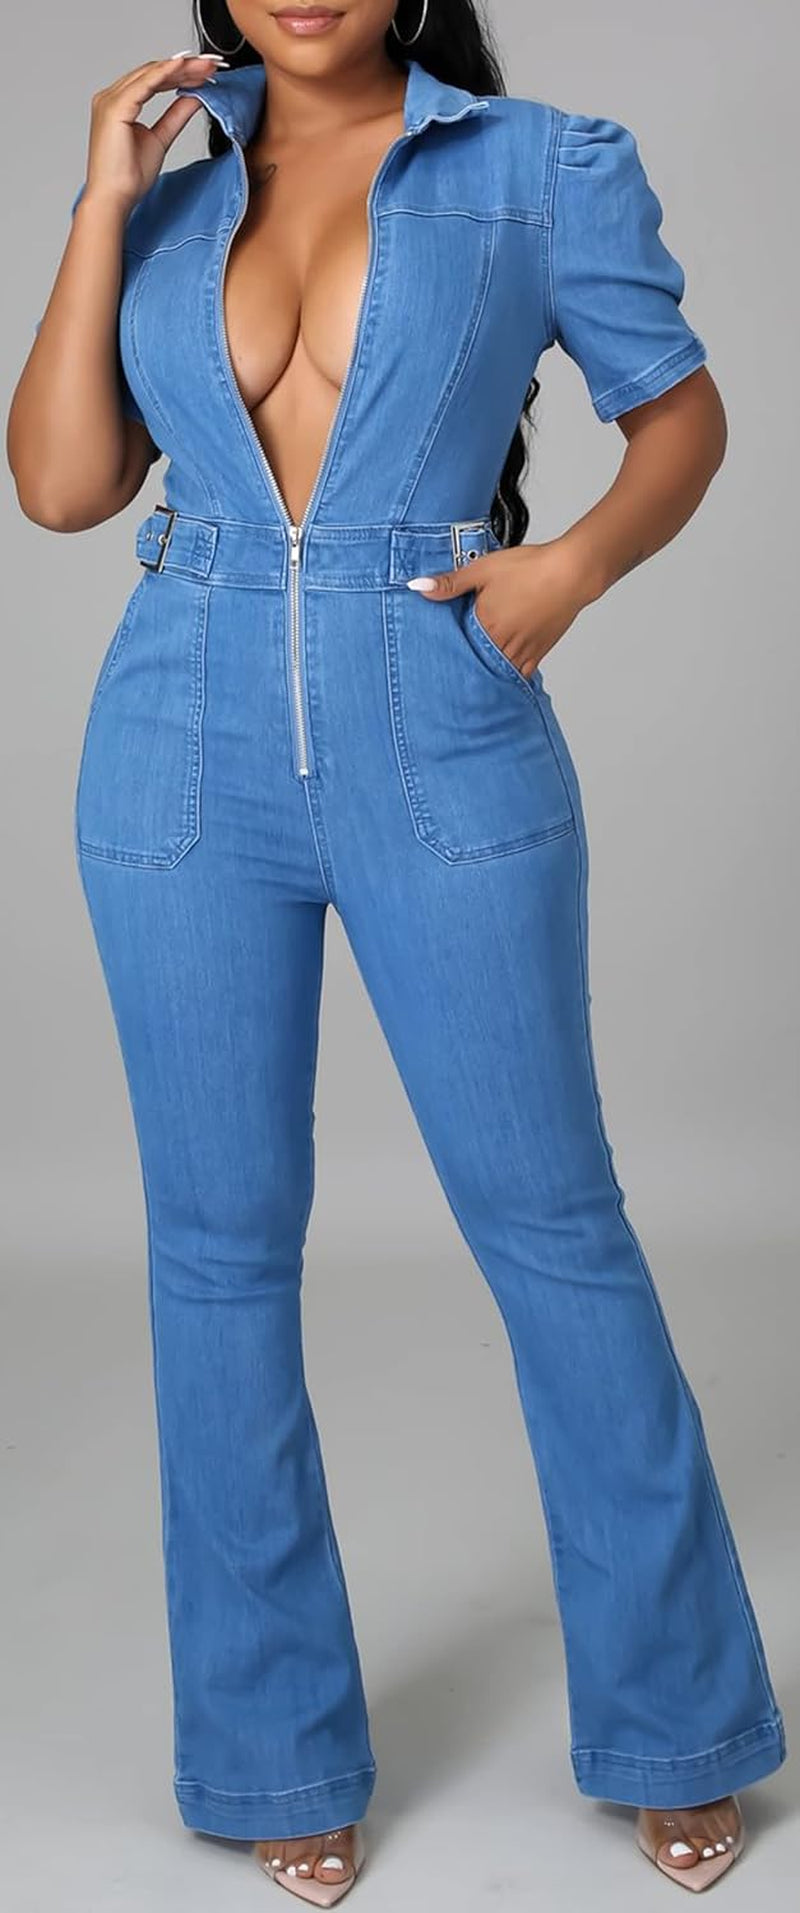 Sexy Jean Jumpsuit for Women Casual Short Sleeve Bell Bottom Denim Pants Jumpsuits with Zipper Pockets